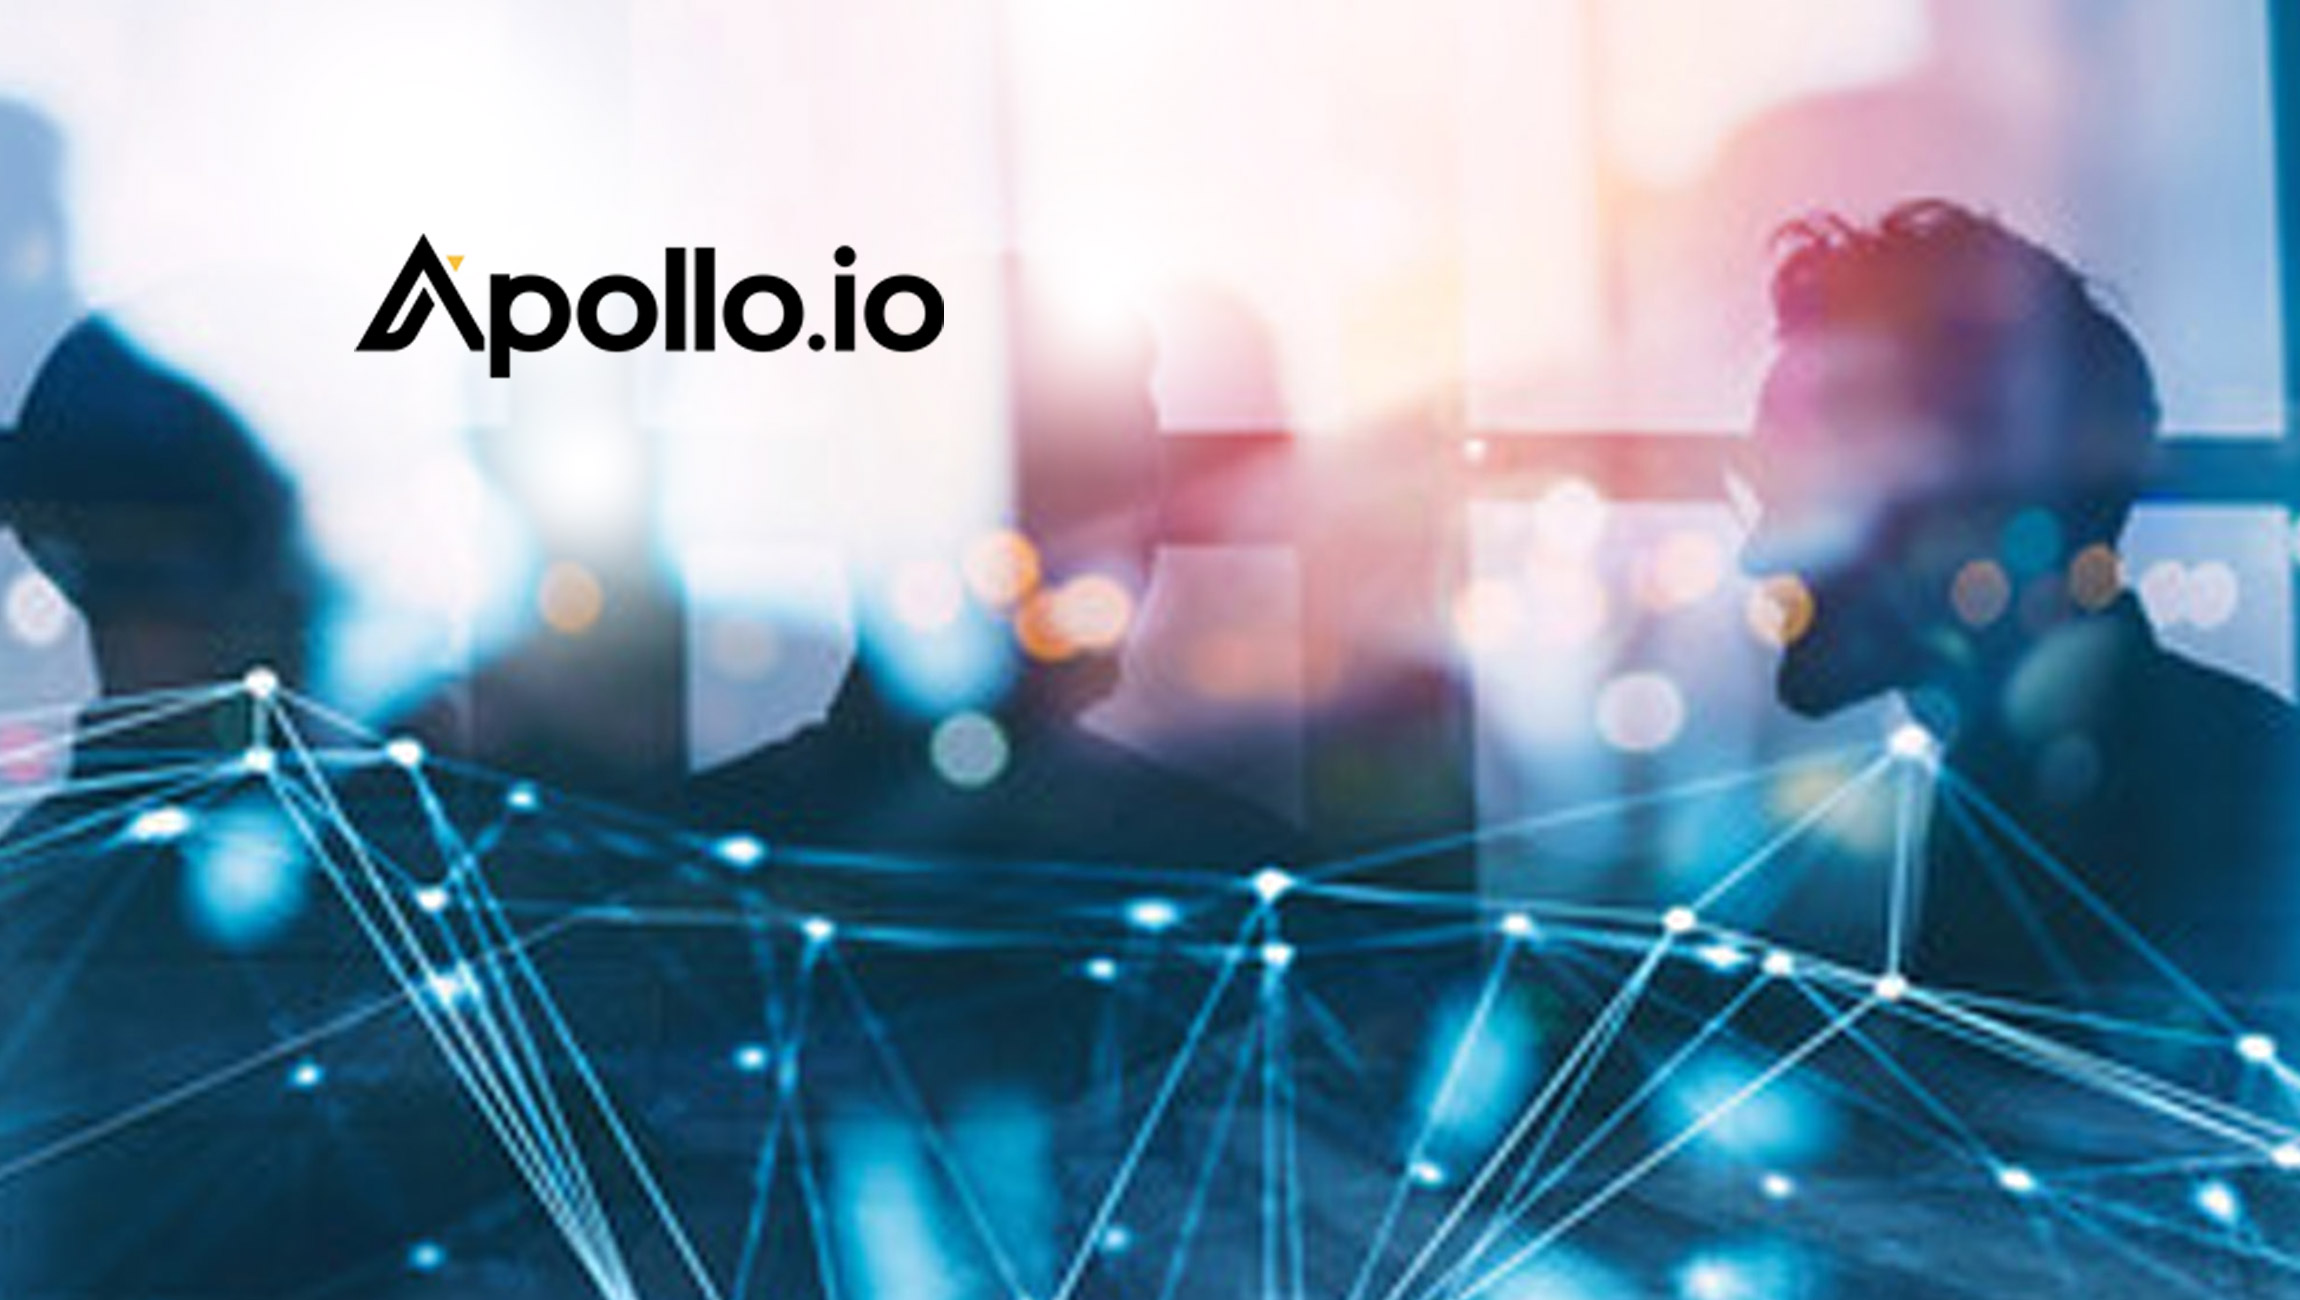 Apollo.io Adds Proven Industry Leaders to its Executive Management Team